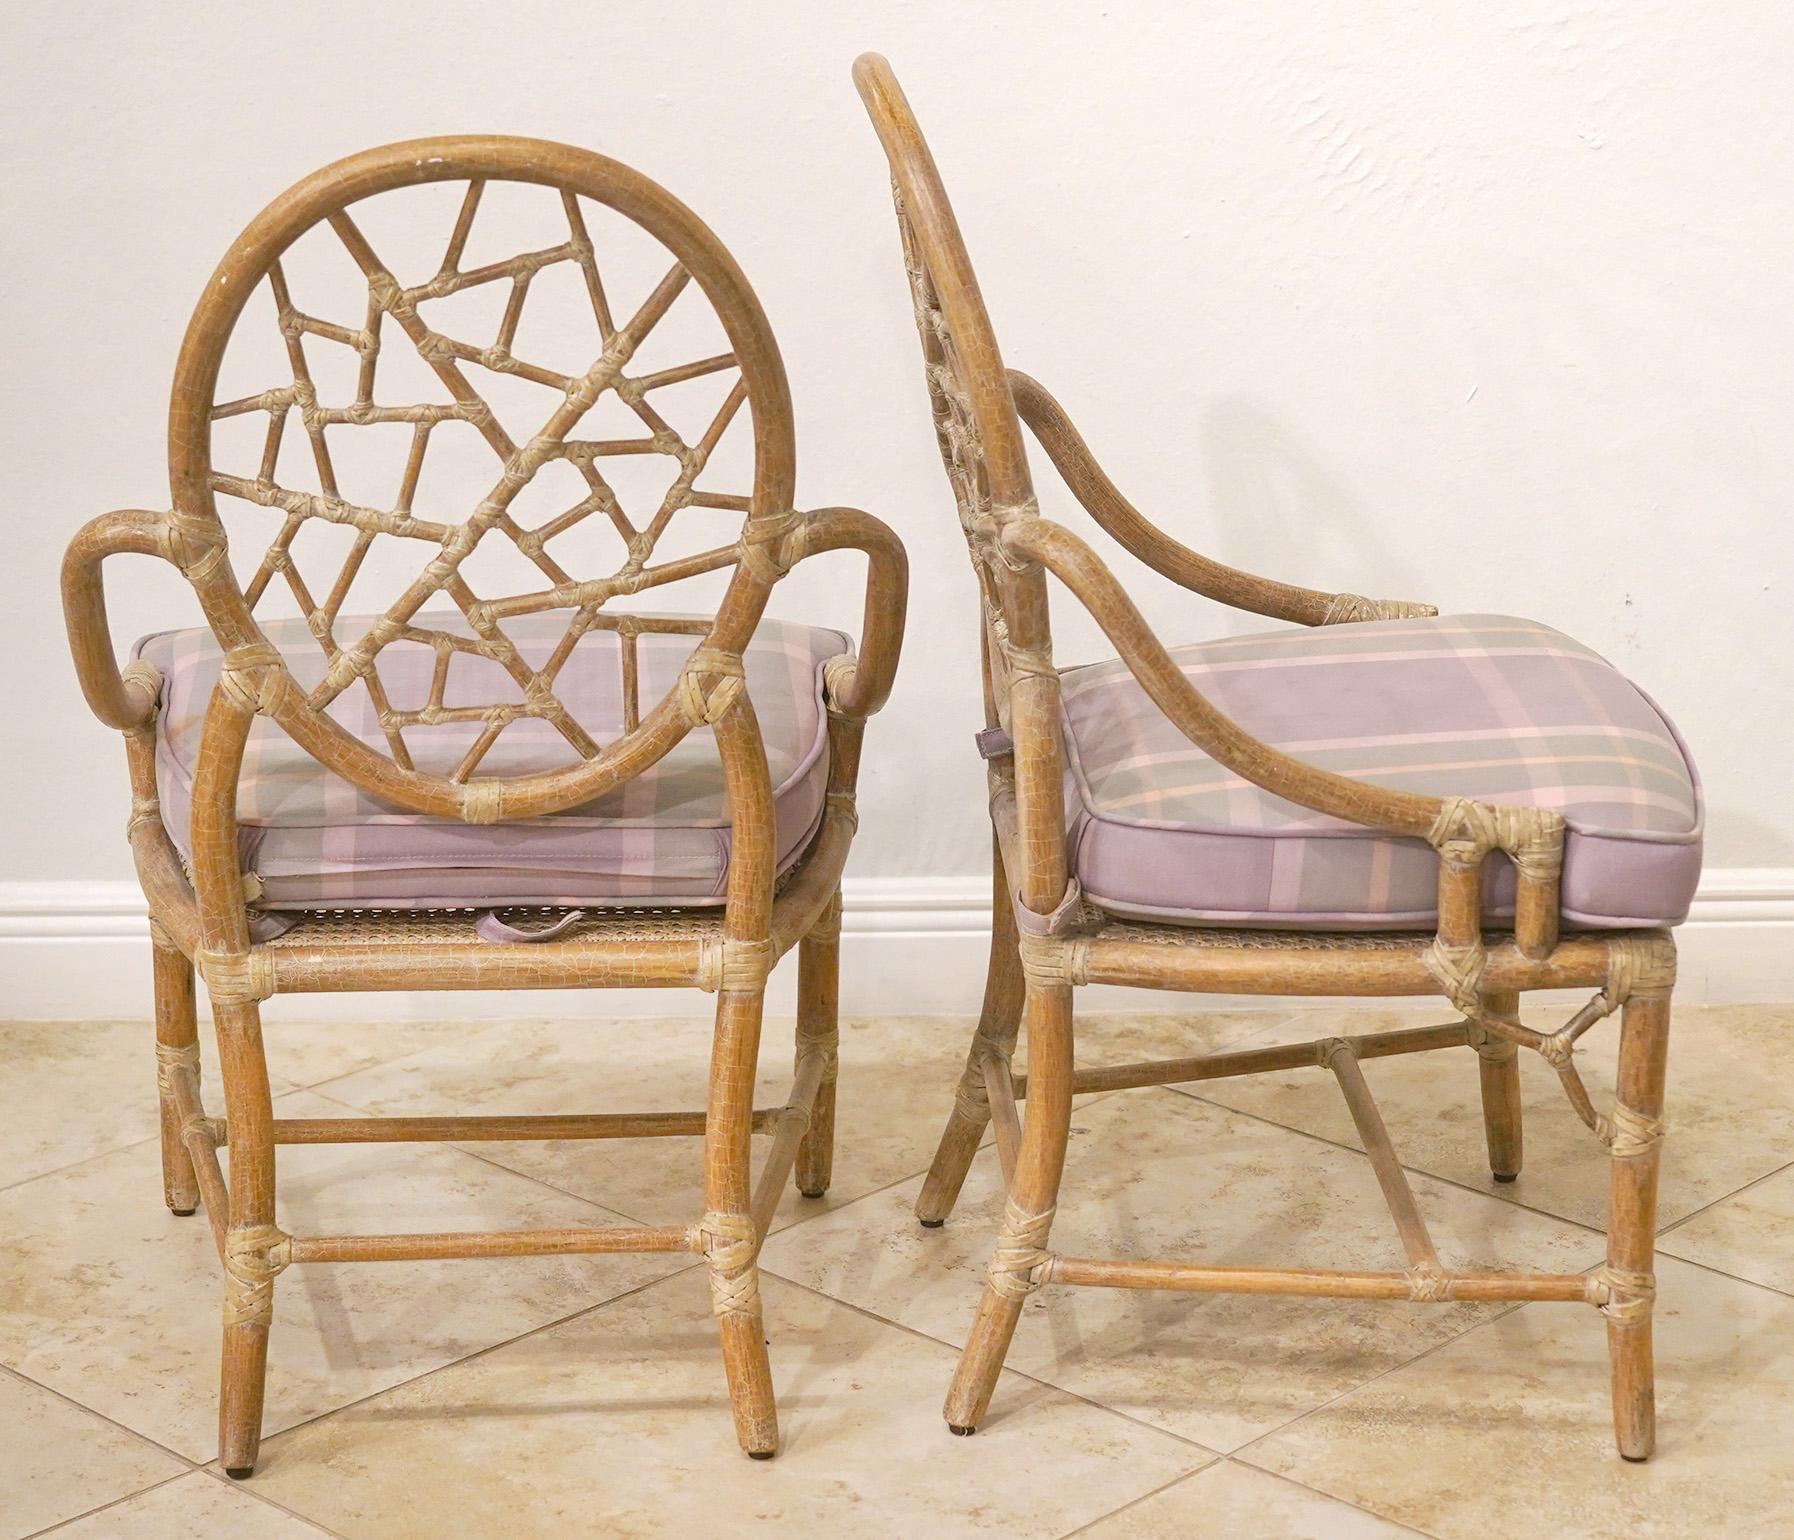 Wood Set of 8 Original McGuire “Cracked Ice” Arm Chairs